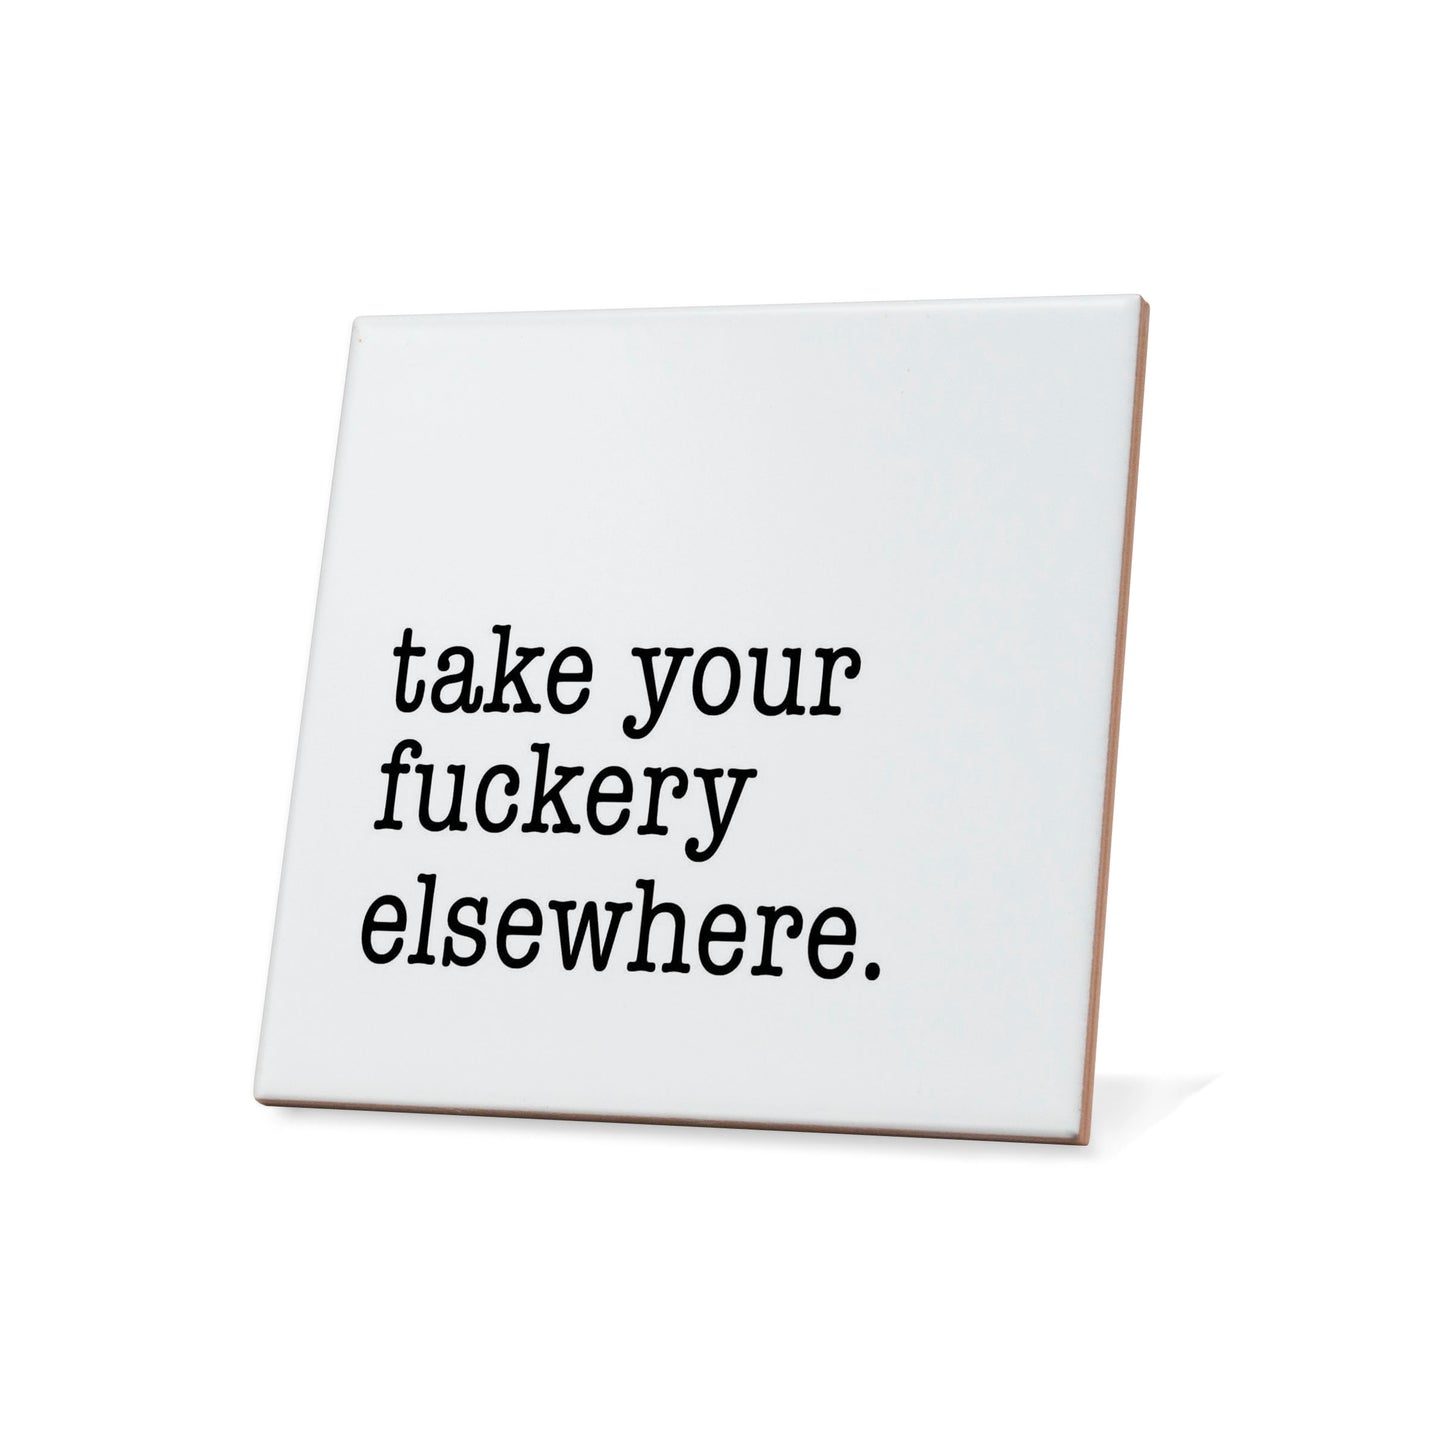 Take your fuckery elsewhere Quote Coaster